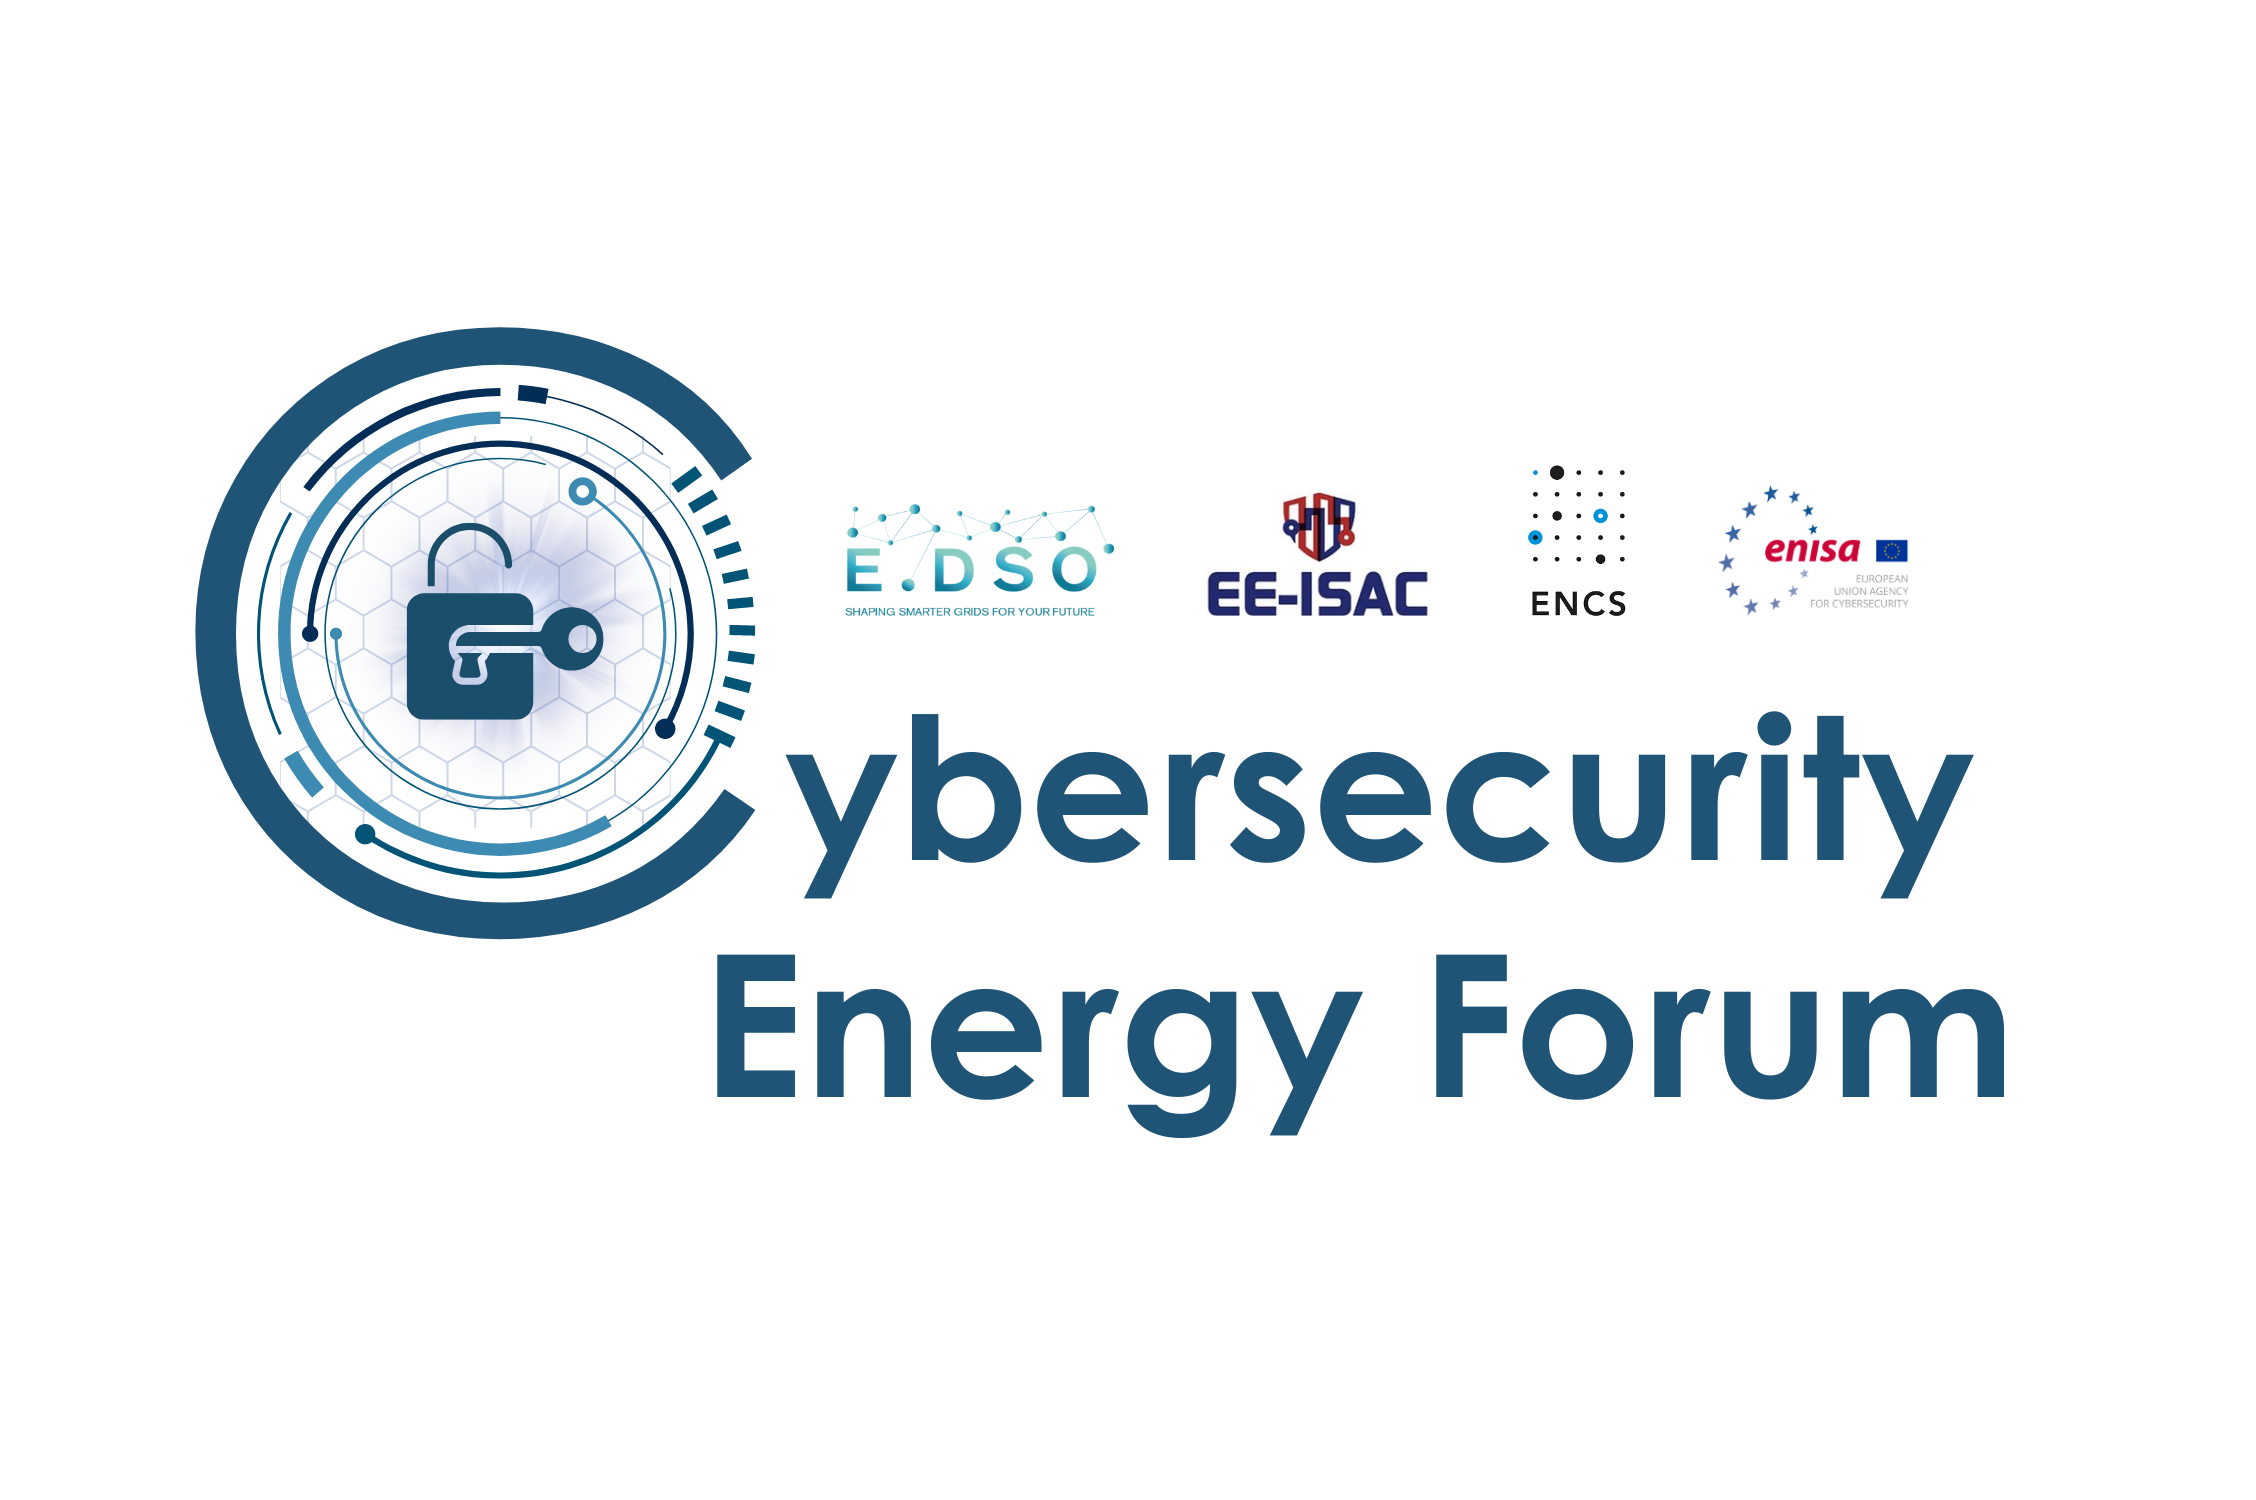 E.DSO-EE-ISAC-ENCS-ENISA 7th Cybersecurity Forum “From theory to practice: How do we get it right? How do we get it right in time?”